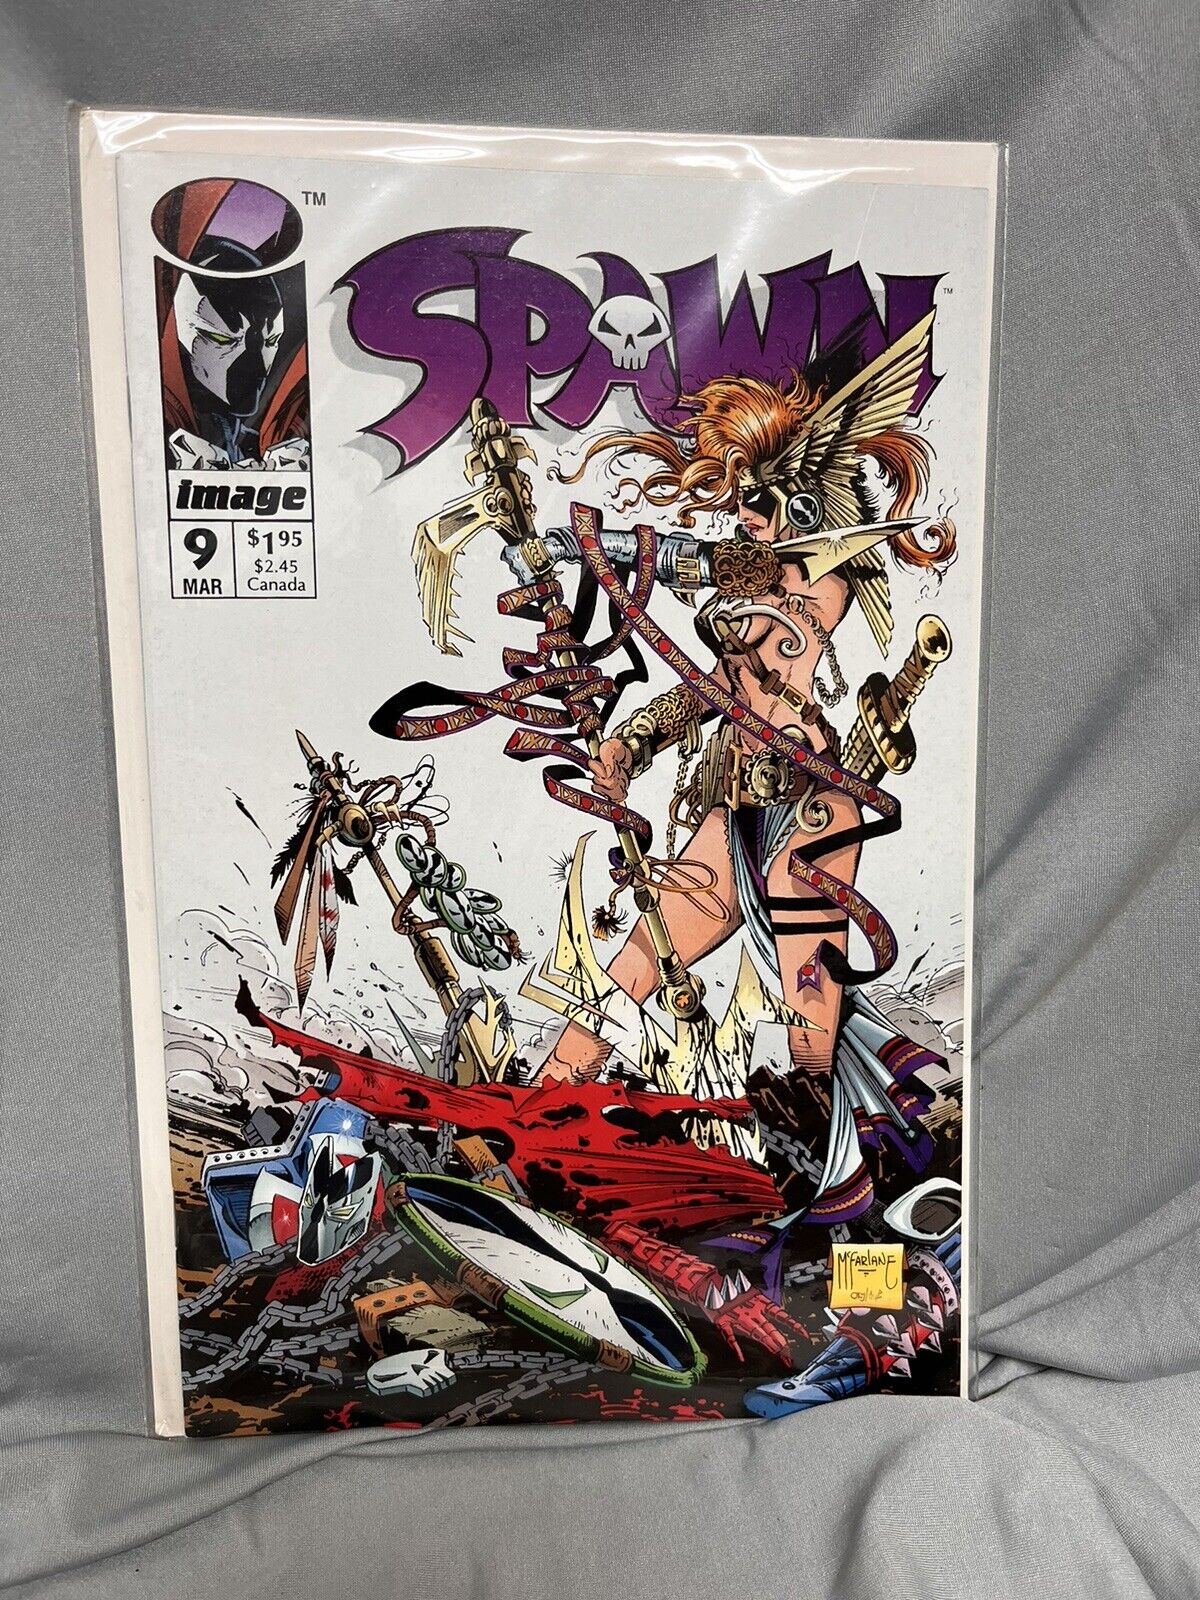 Spawn #9 (Image Comics, May 1992) MINT condition